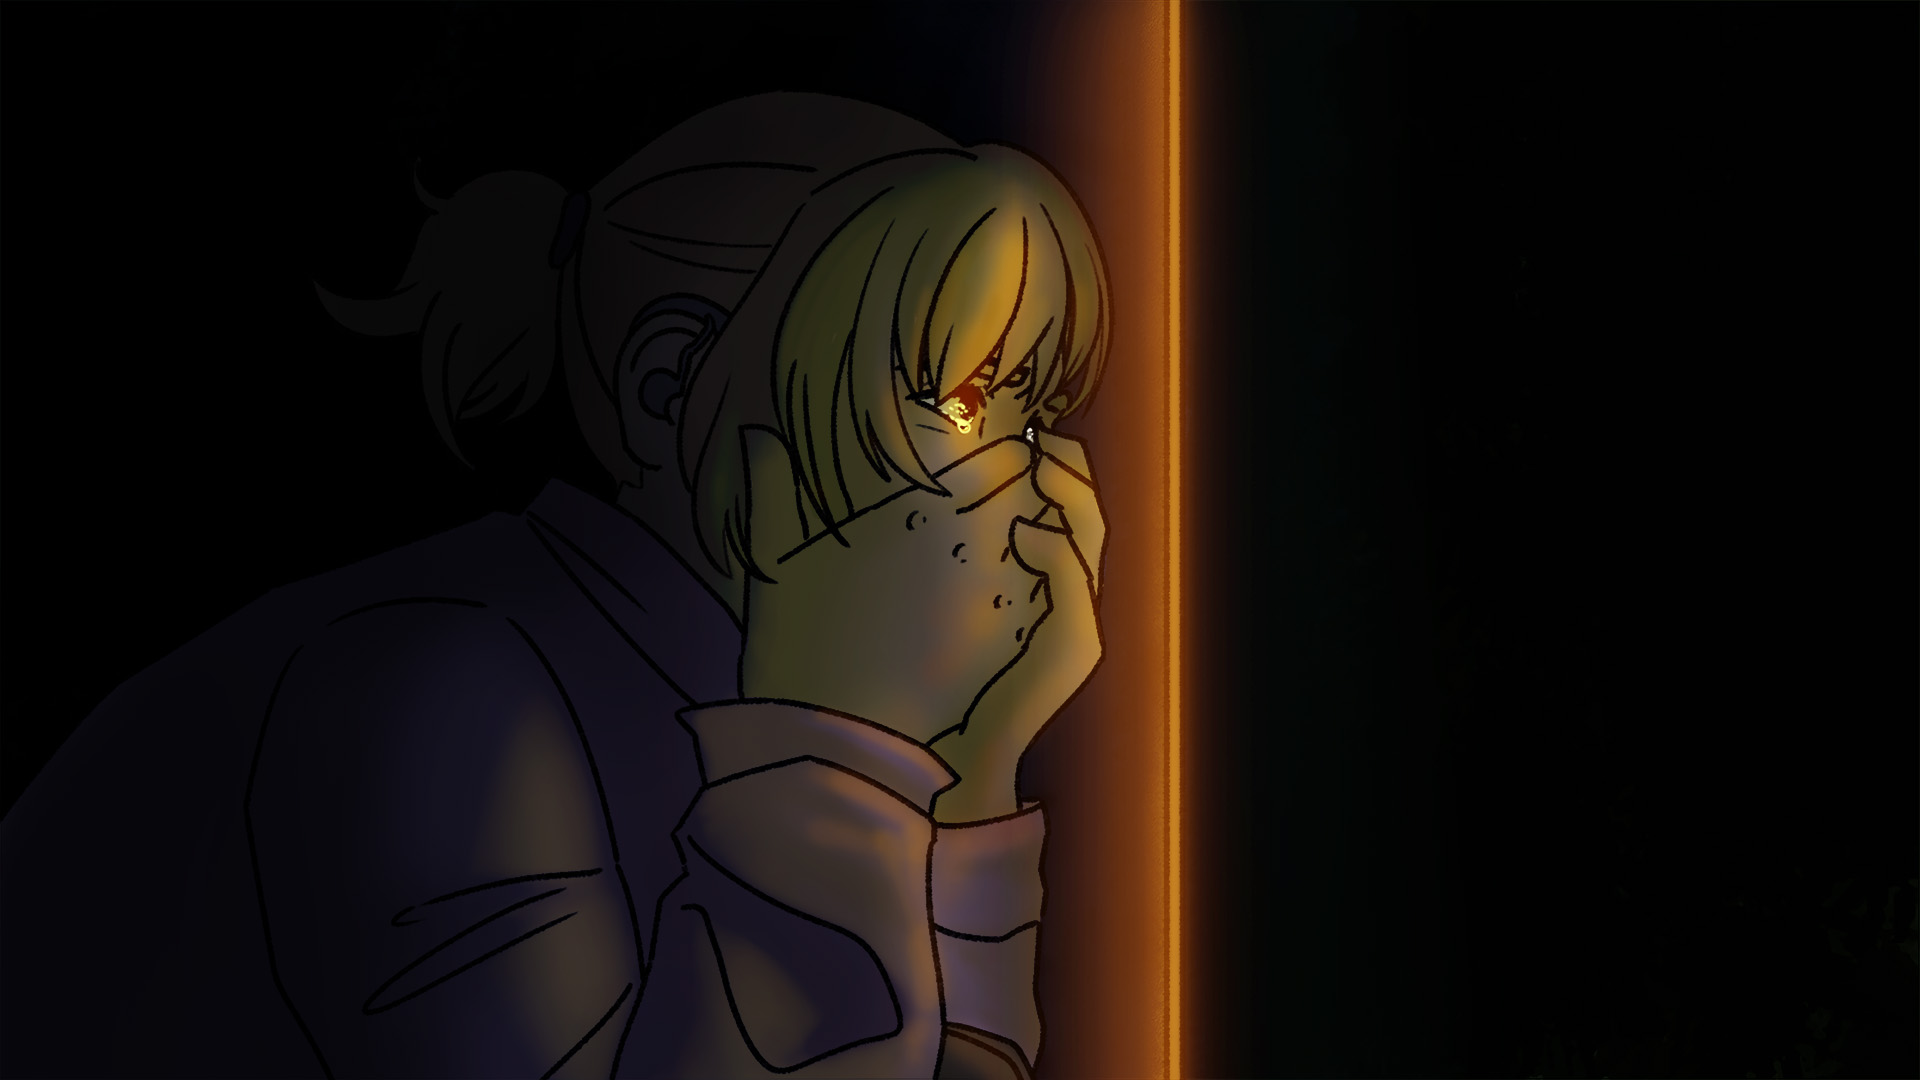 Illustration of girl peeking through door with hands over mouth and crying